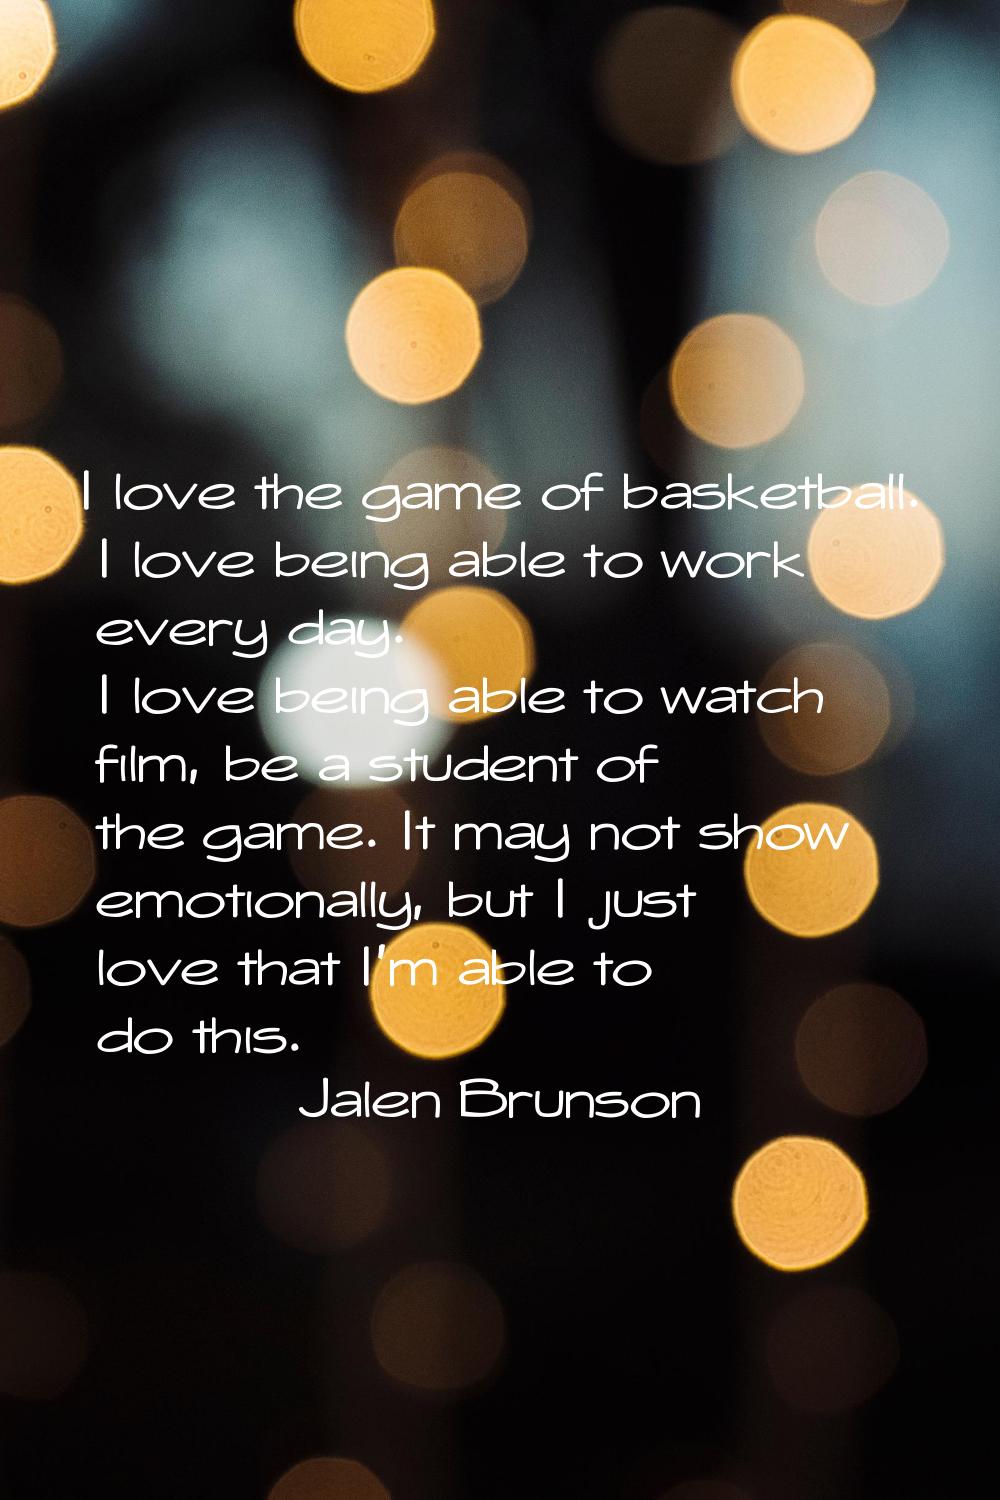 I love the game of basketball. I love being able to work every day. I love being able to watch film